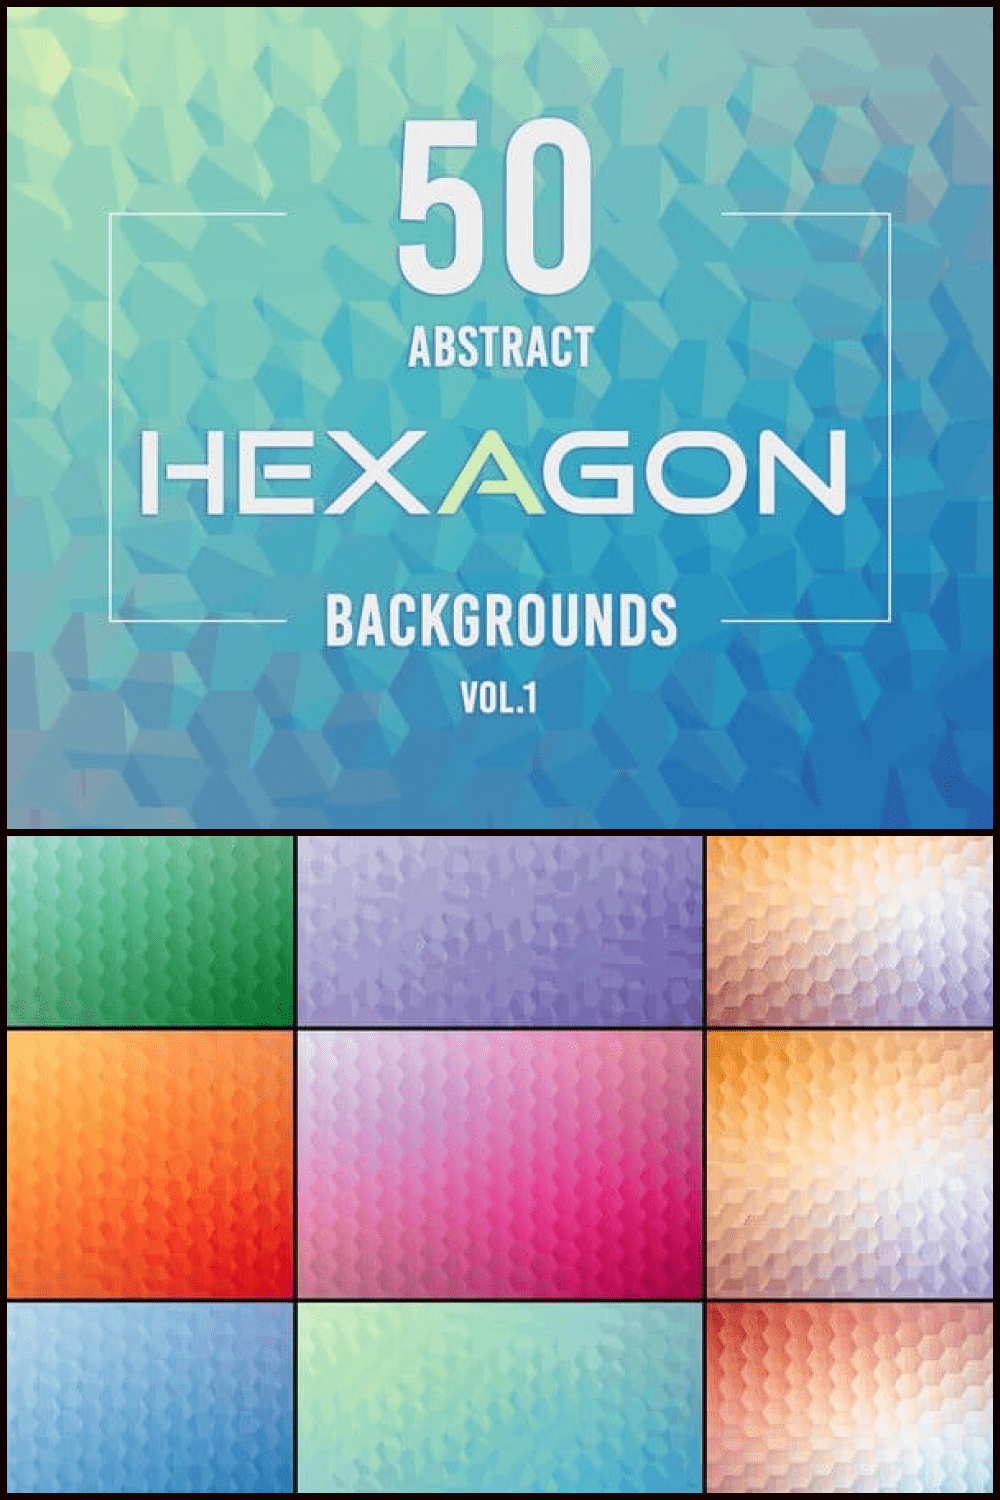 50 Abstract Hexagon Backgrounds - MasterBundles - Pinterest Collage Image.